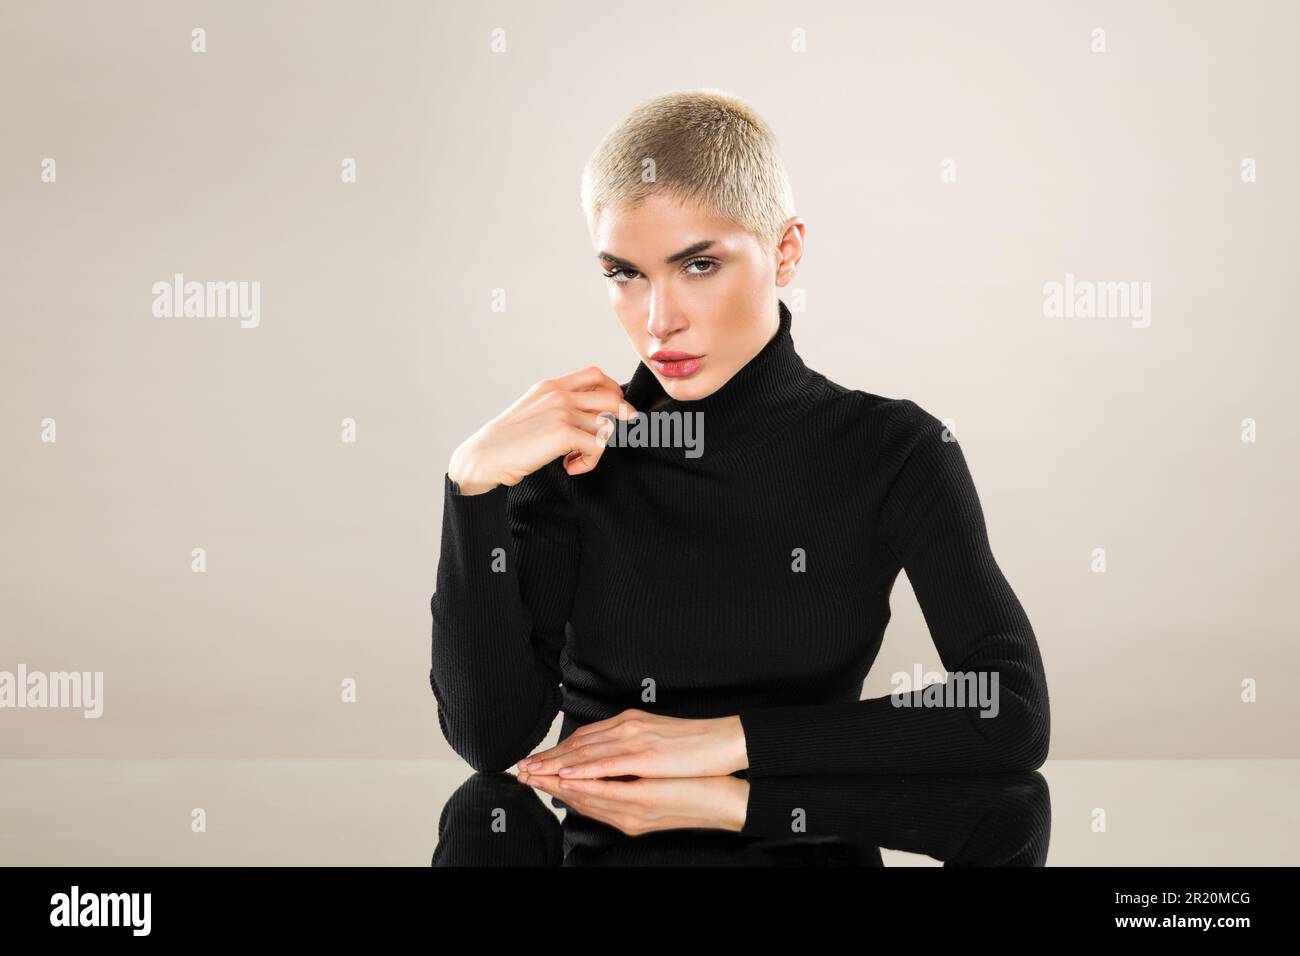 Portrait of serious young female in black turtleneck with short blond hair looking at camera against beige background Stock Photo